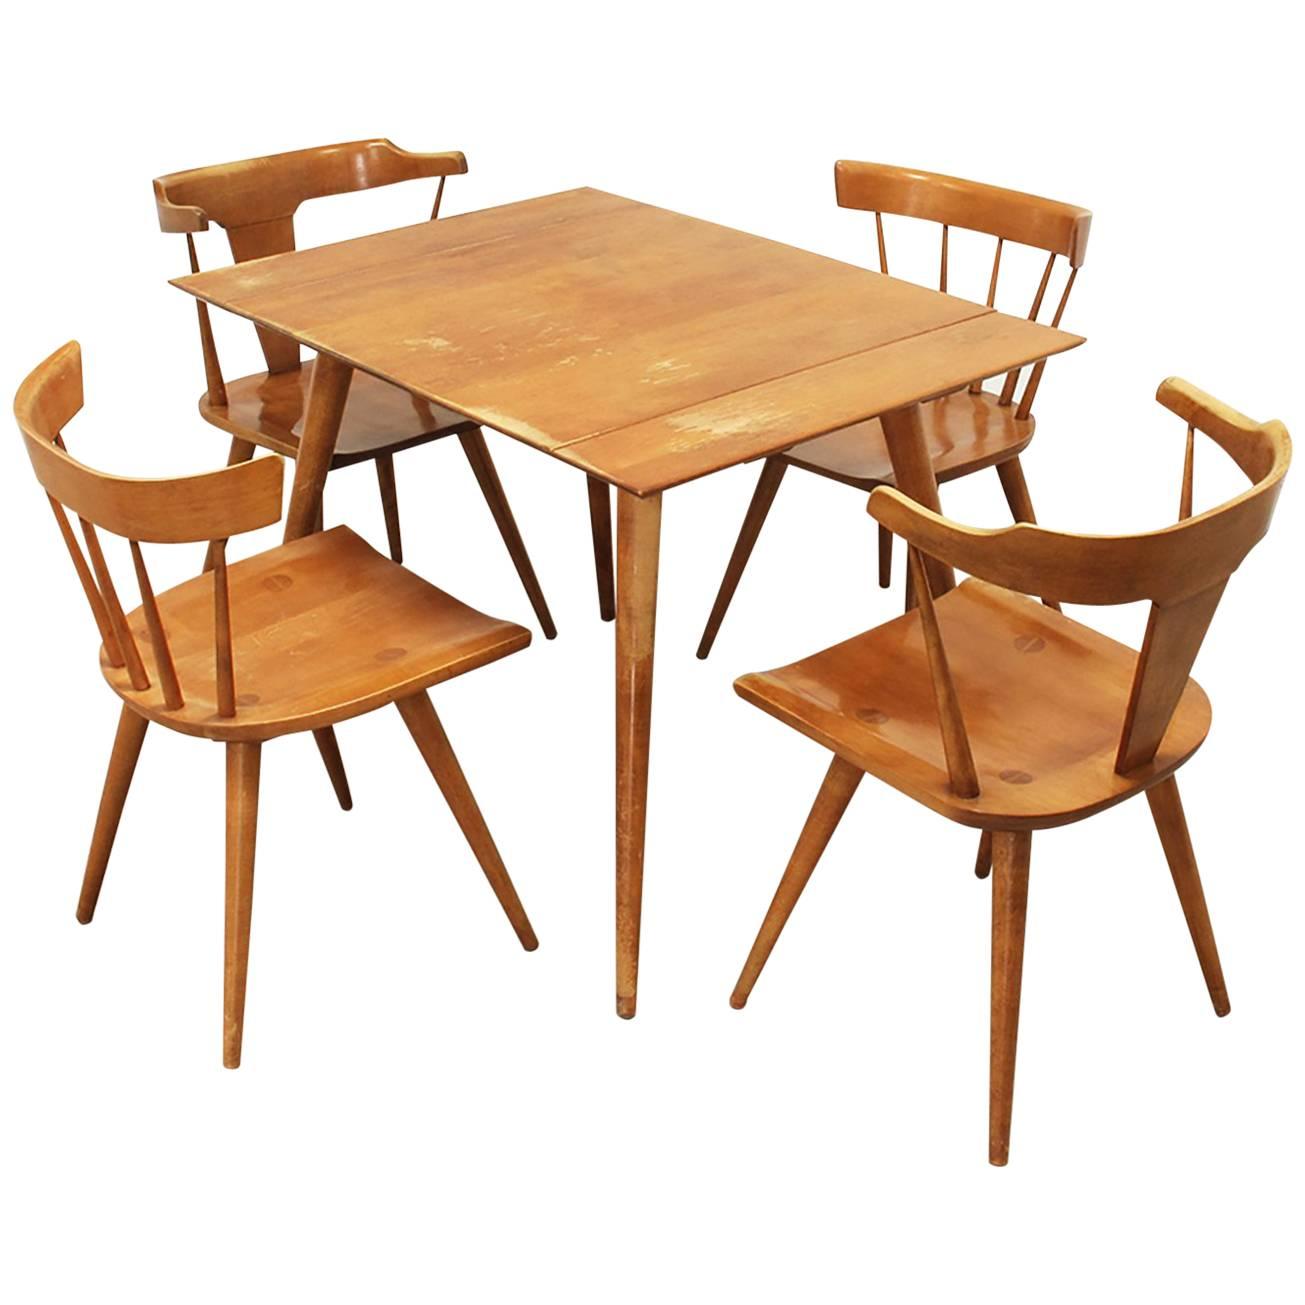 Vintage Solid Wood Dining Set of Four Chairs and One Table by Paul McCobb, 1950s For Sale